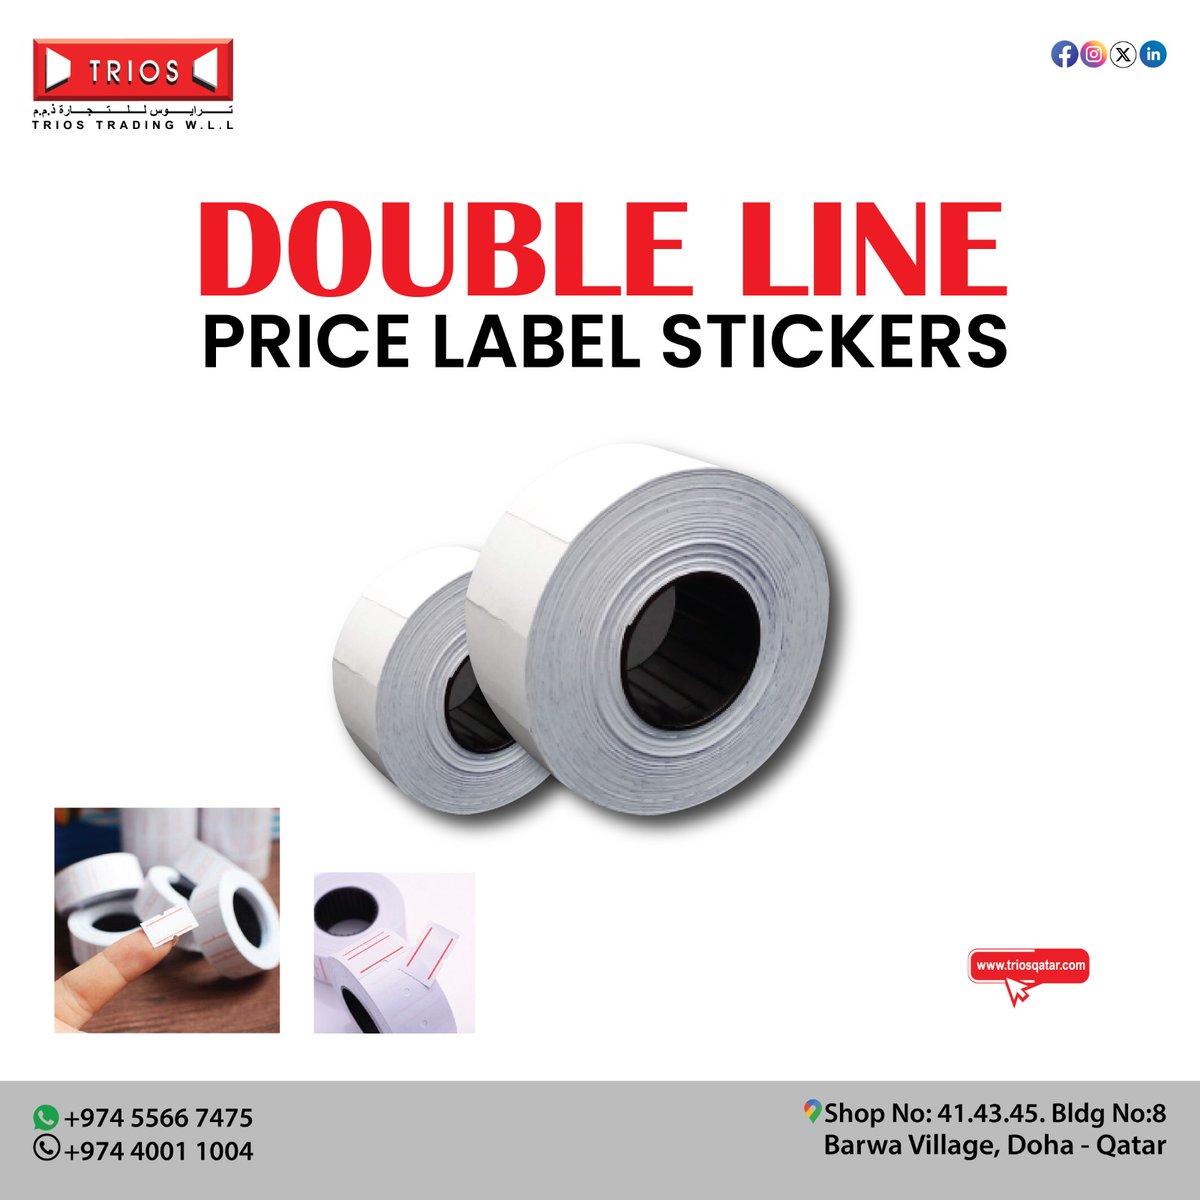 Price labeling just got a double upgrade! 🆙🏷️ Trios Double Line Price Label Stickers are now available in Qatar, both online and offline. #pricelabel #pricelabels #pricelabeling #pricelabeltag #officestationery #officestationeryprinting #officestationeryinwholesale